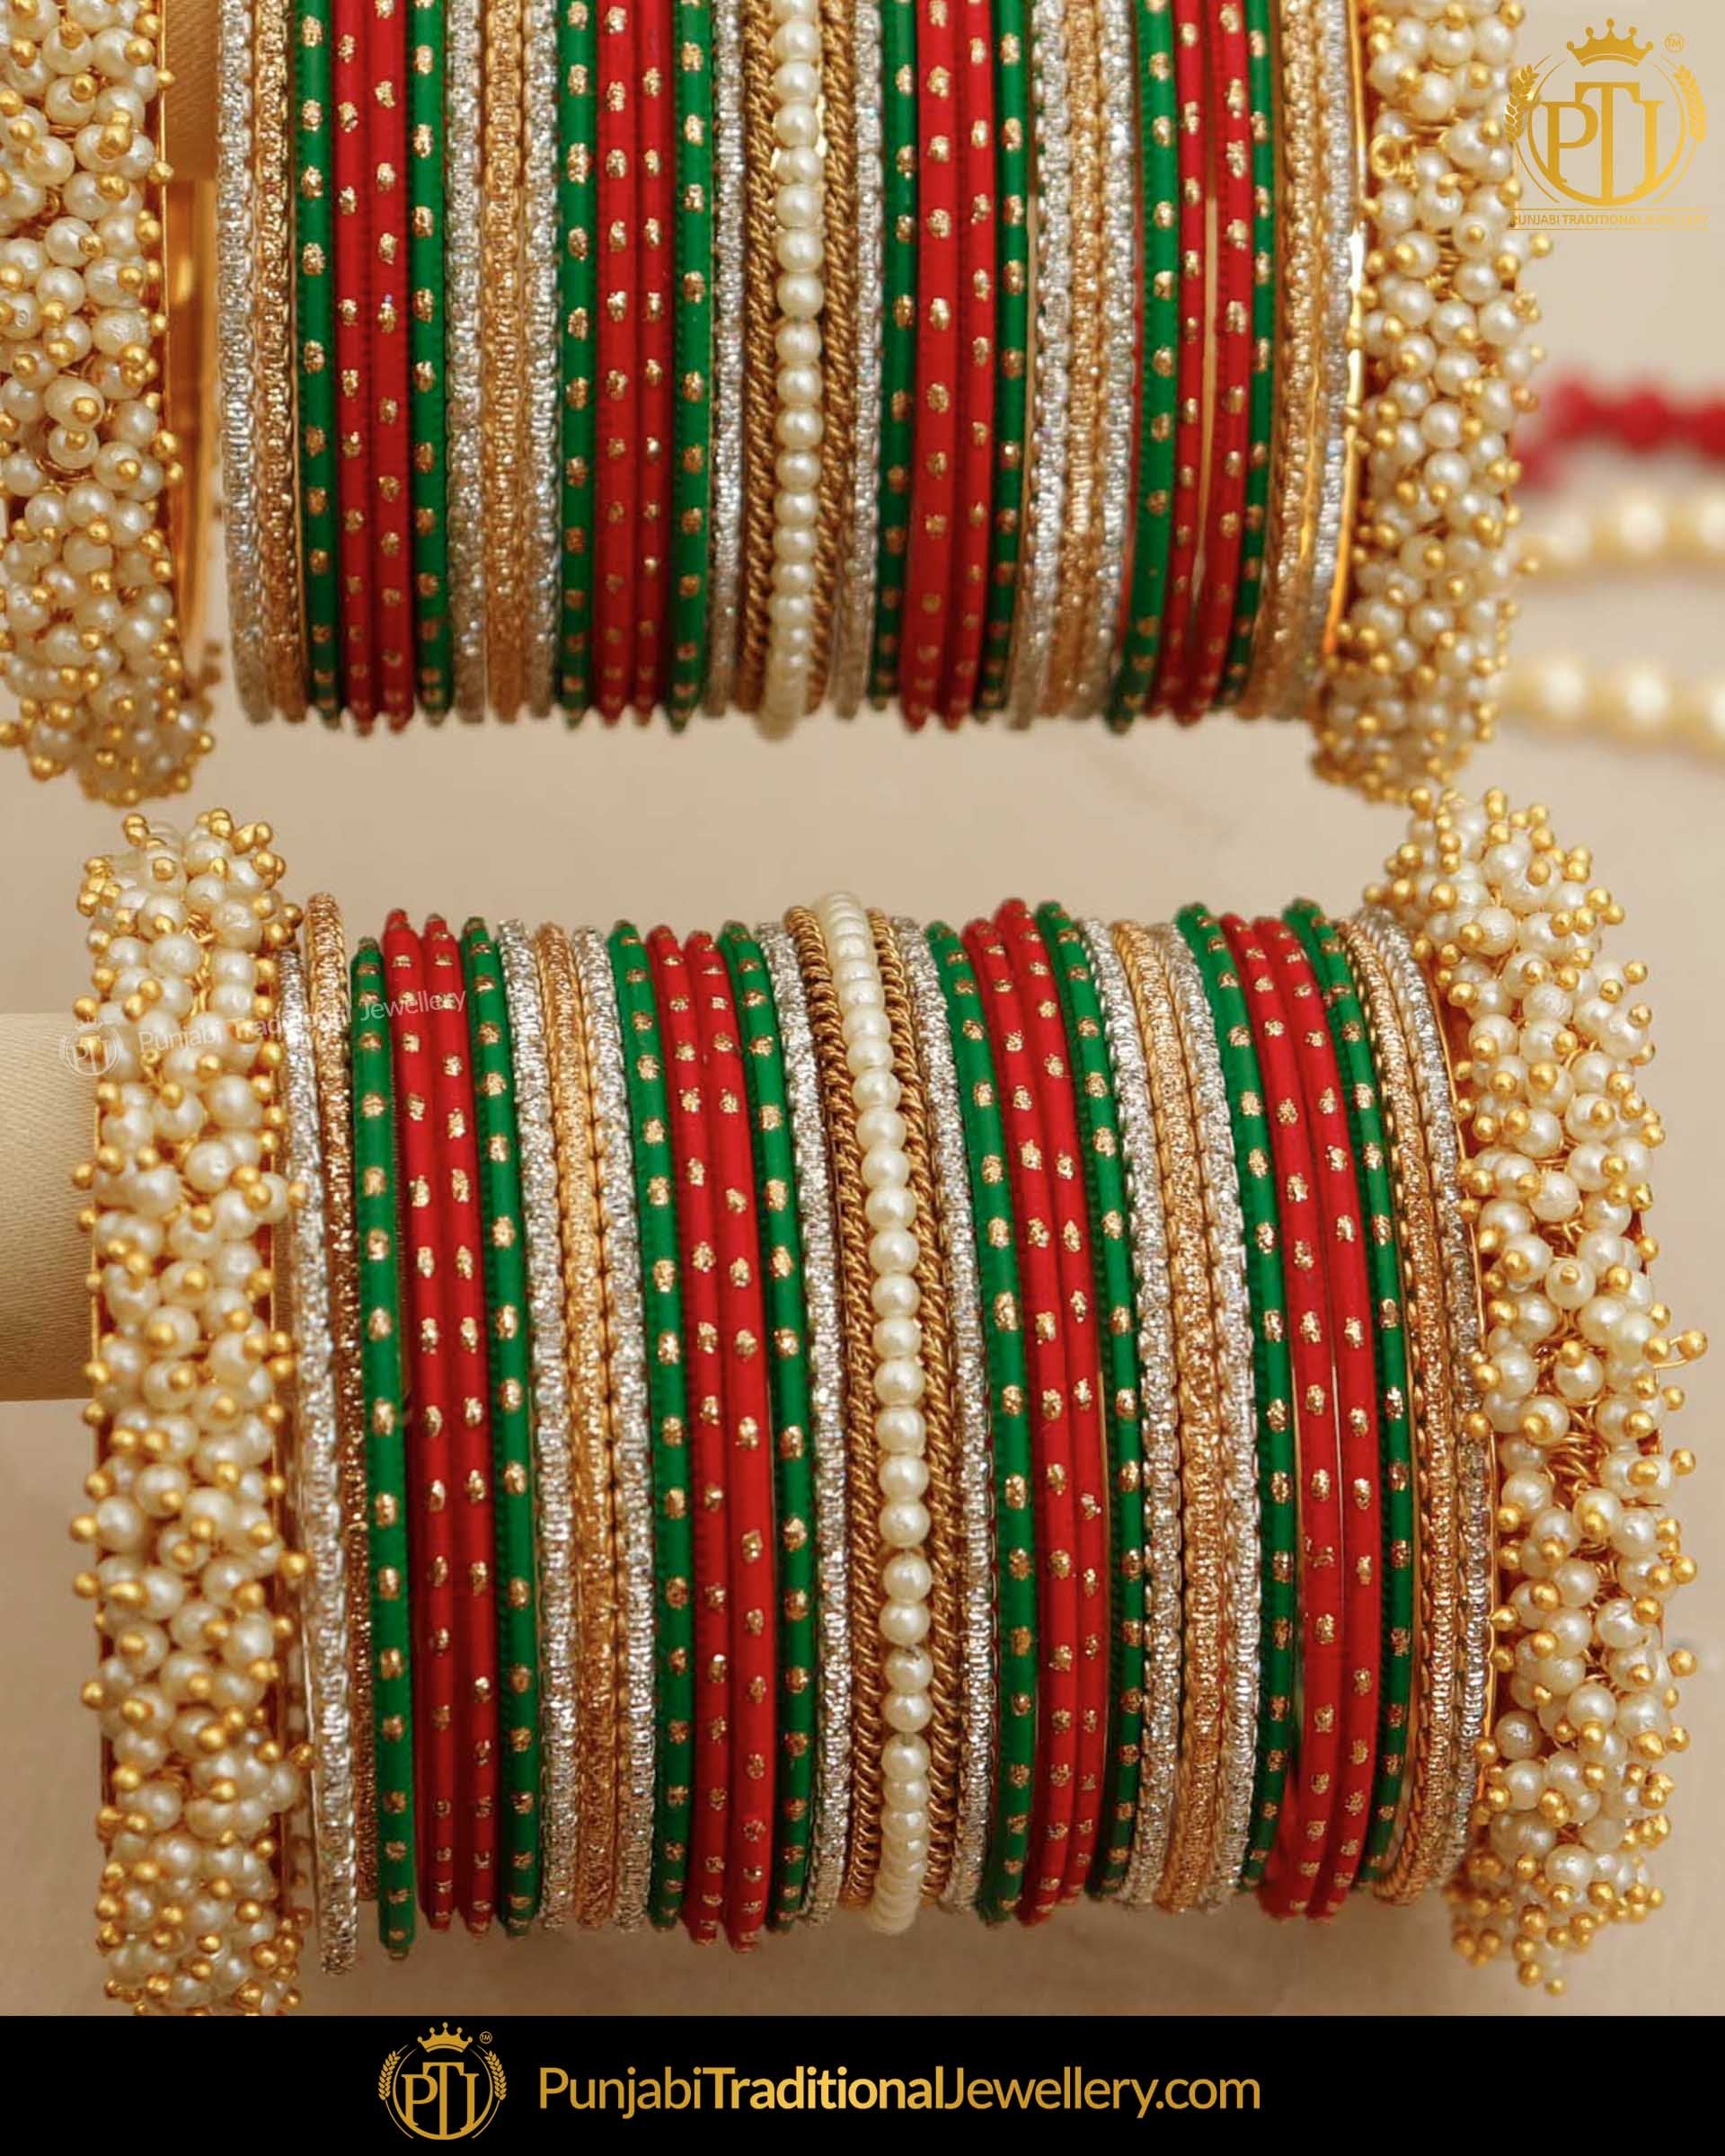 Smooth Dotted Design Baby Bangles Long Lasting Gold Plated Jewellery B25212